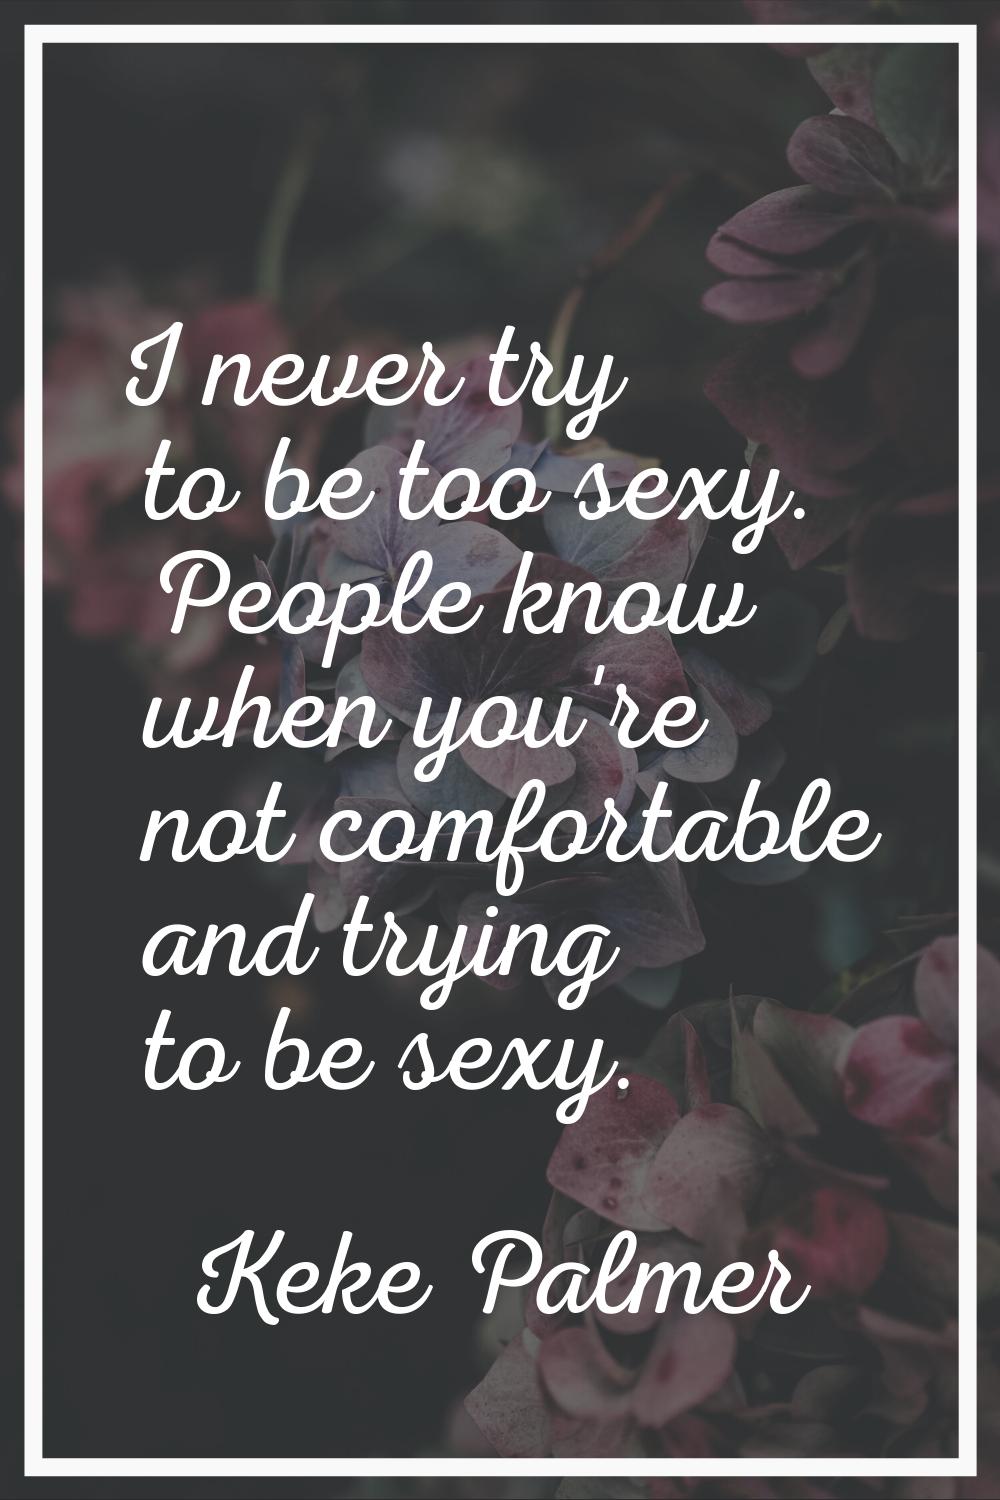 I never try to be too sexy. People know when you're not comfortable and trying to be sexy.